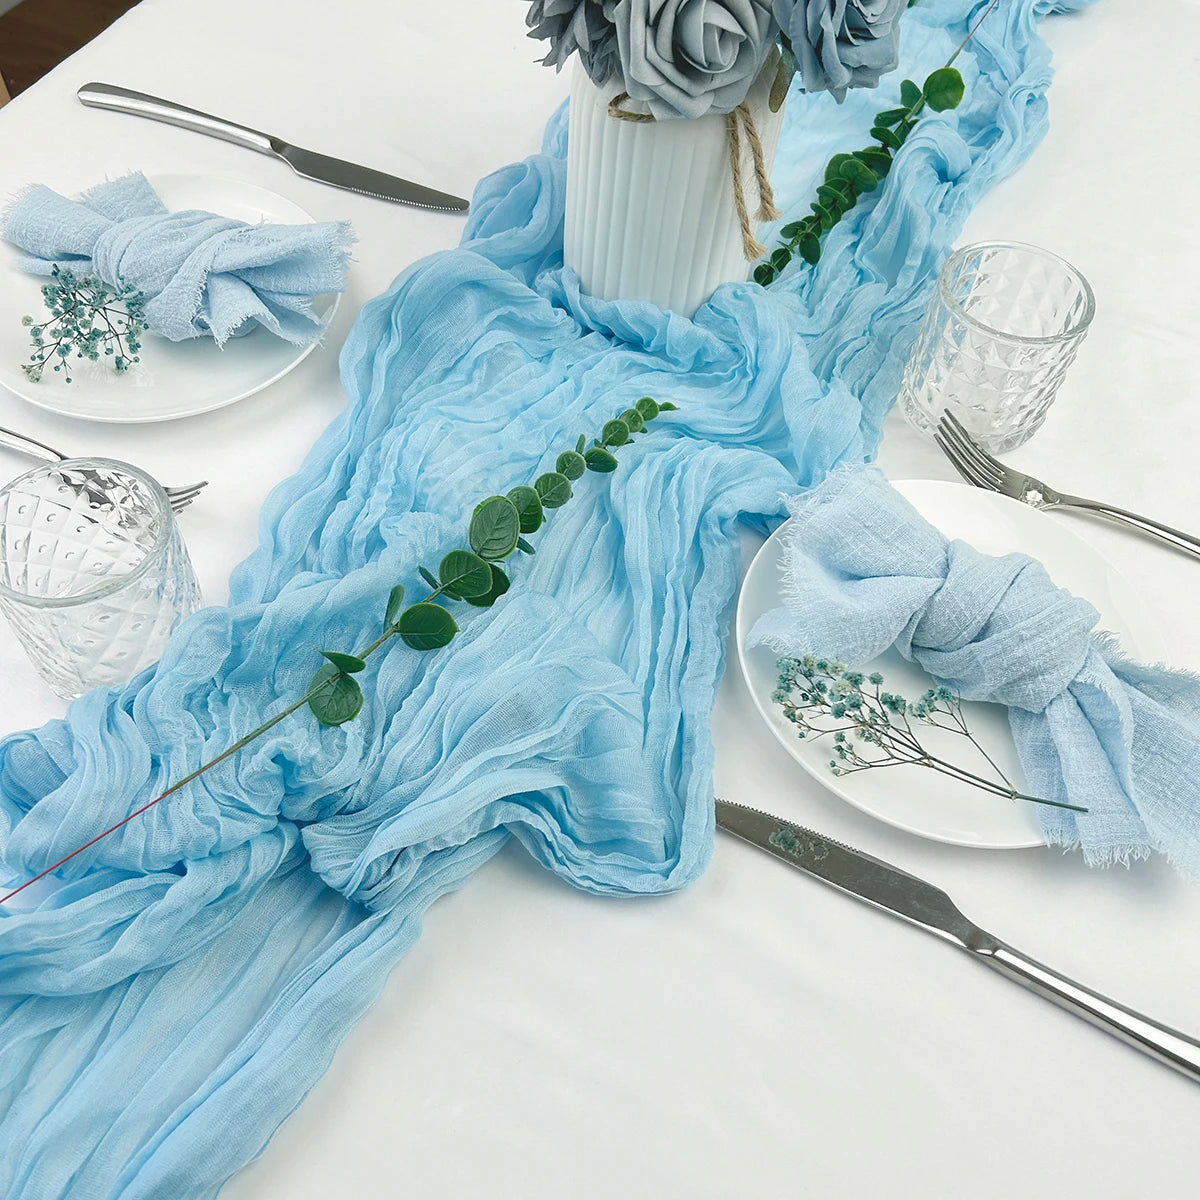 Add a Touch of Rustic Elegance with Our Sage Gauze Fabric  - Perfect for Junk Journal Cloth and As A Table Runner for Weddings, Parties, Holidays, and More!